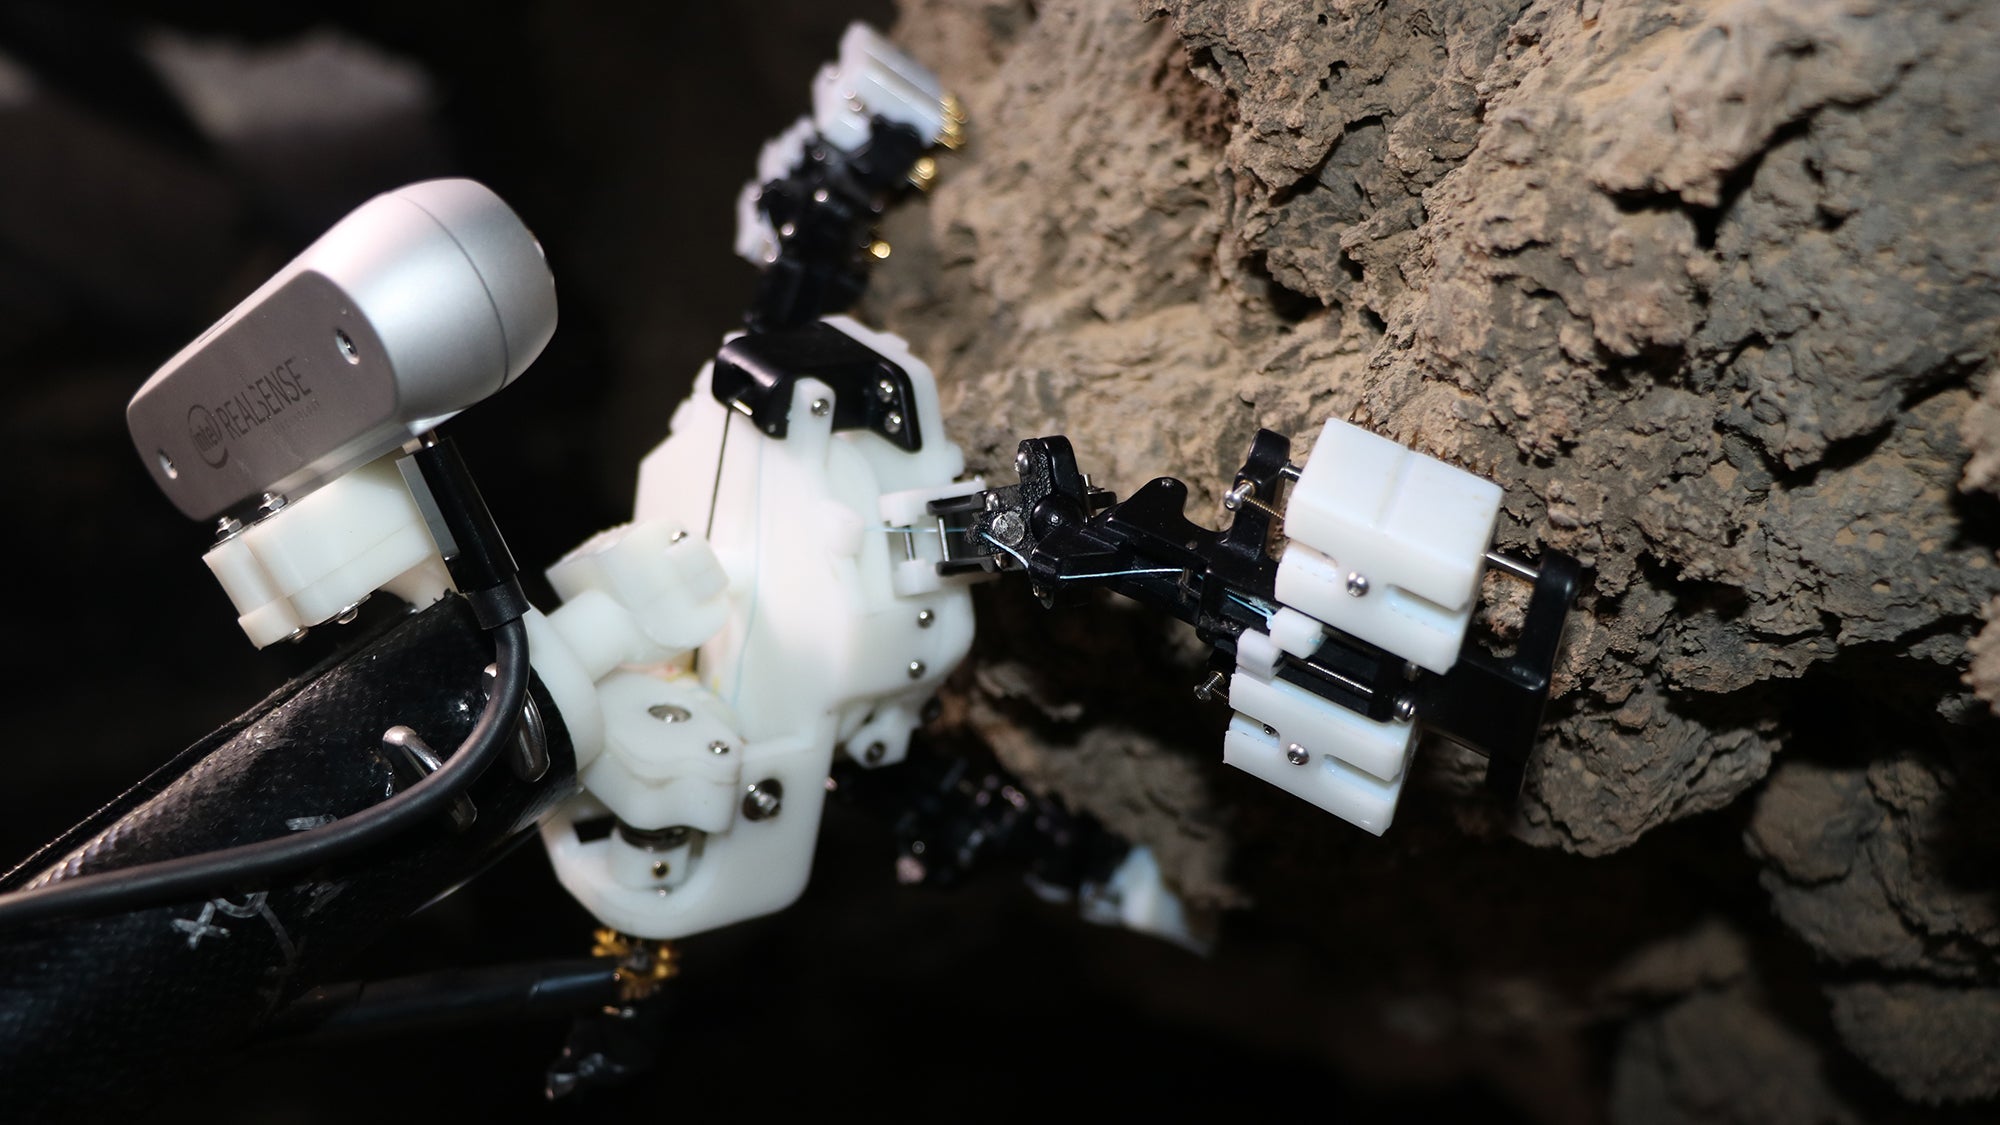 The robot inspired by Dad's long legs could one day weave through Martian caves